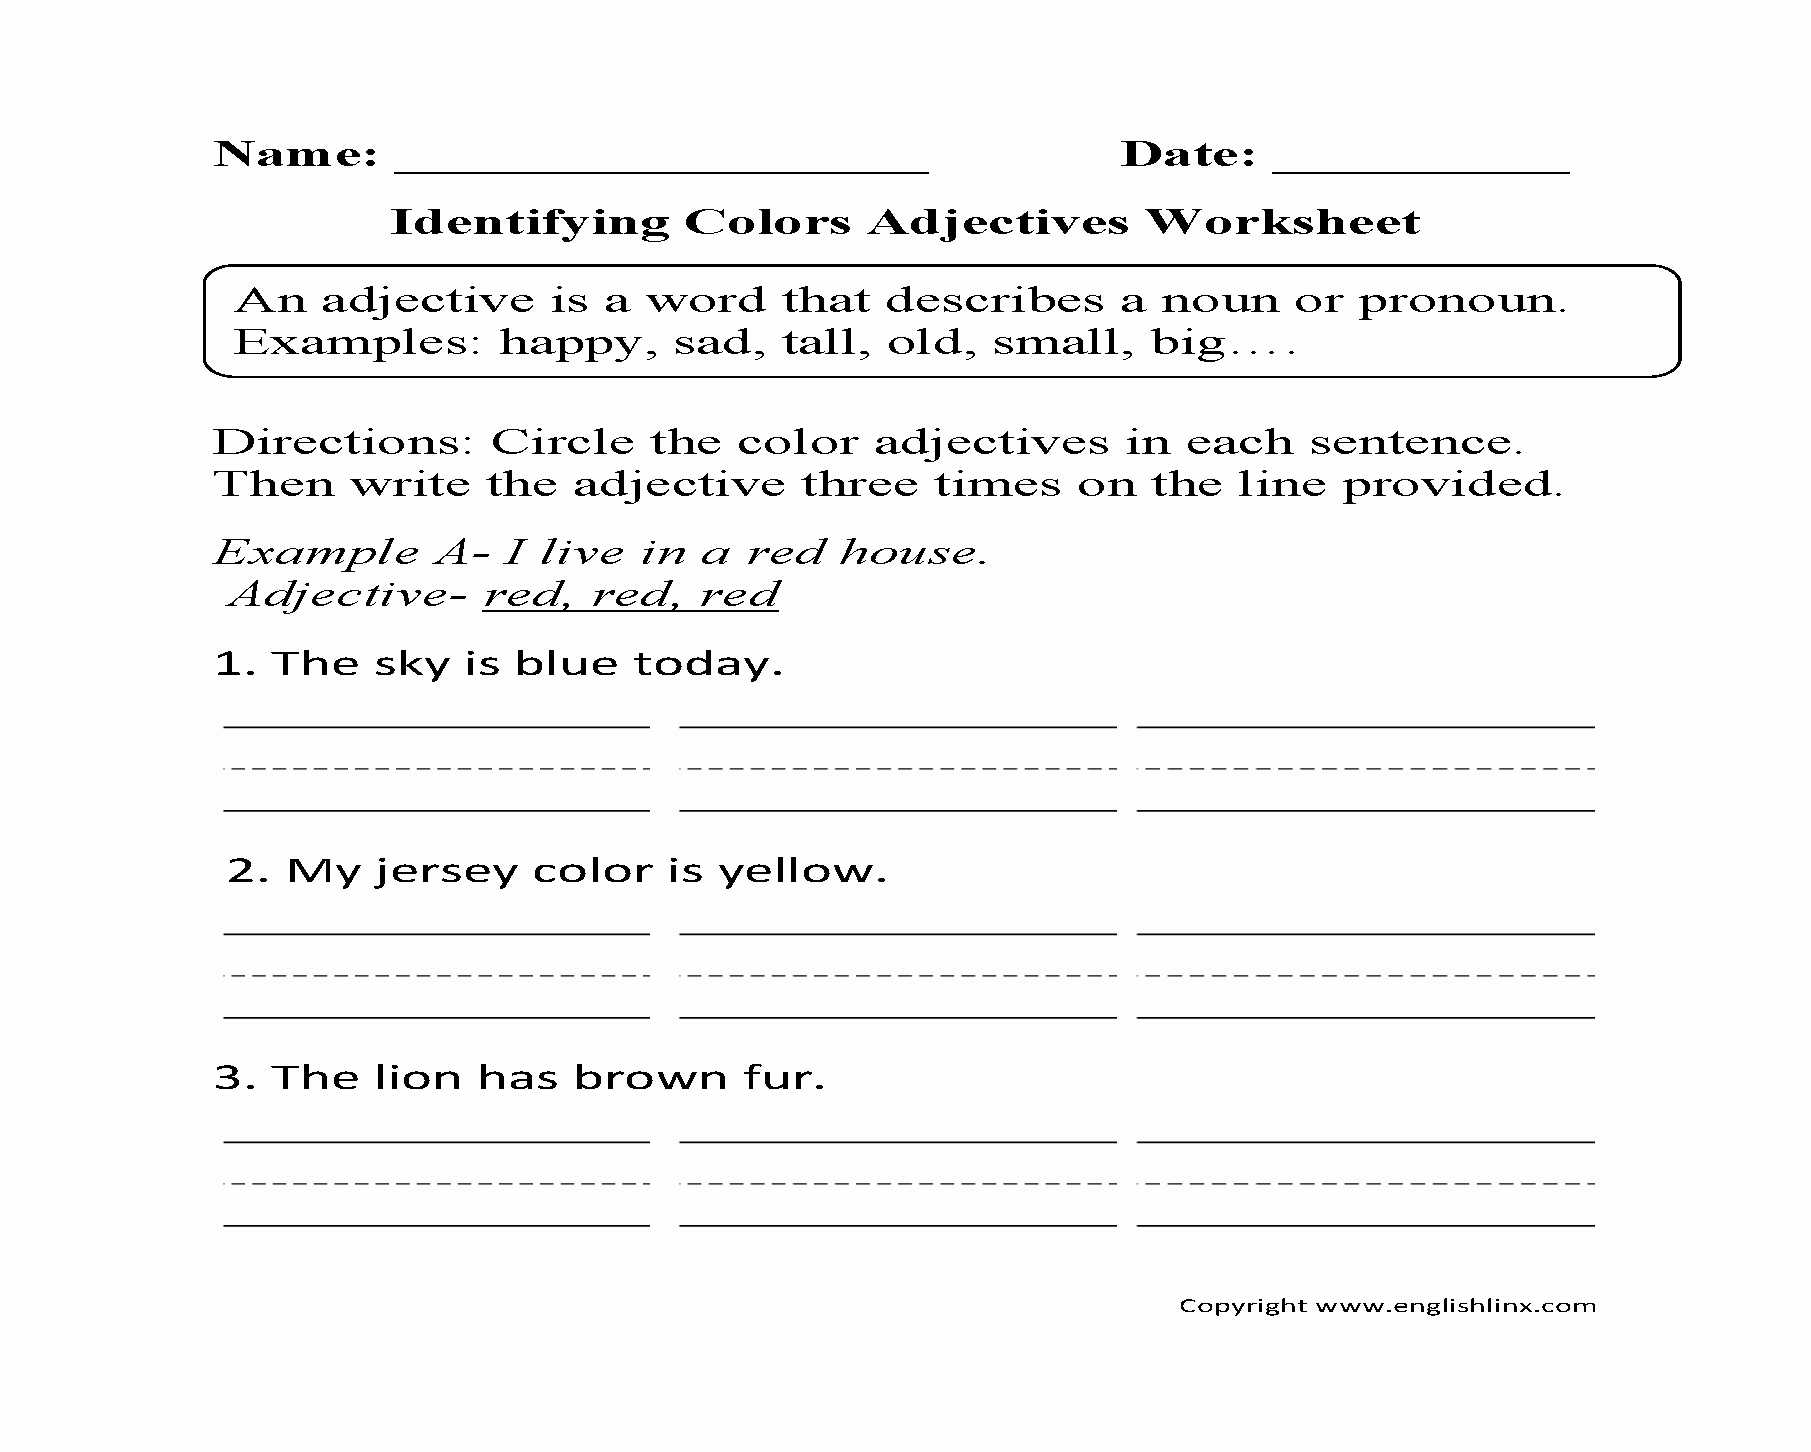 Adjectives Worksheet 3 Spanish Answers as Well as Possessive Adjectives Spanish Worksheet Months the Year Worksheet